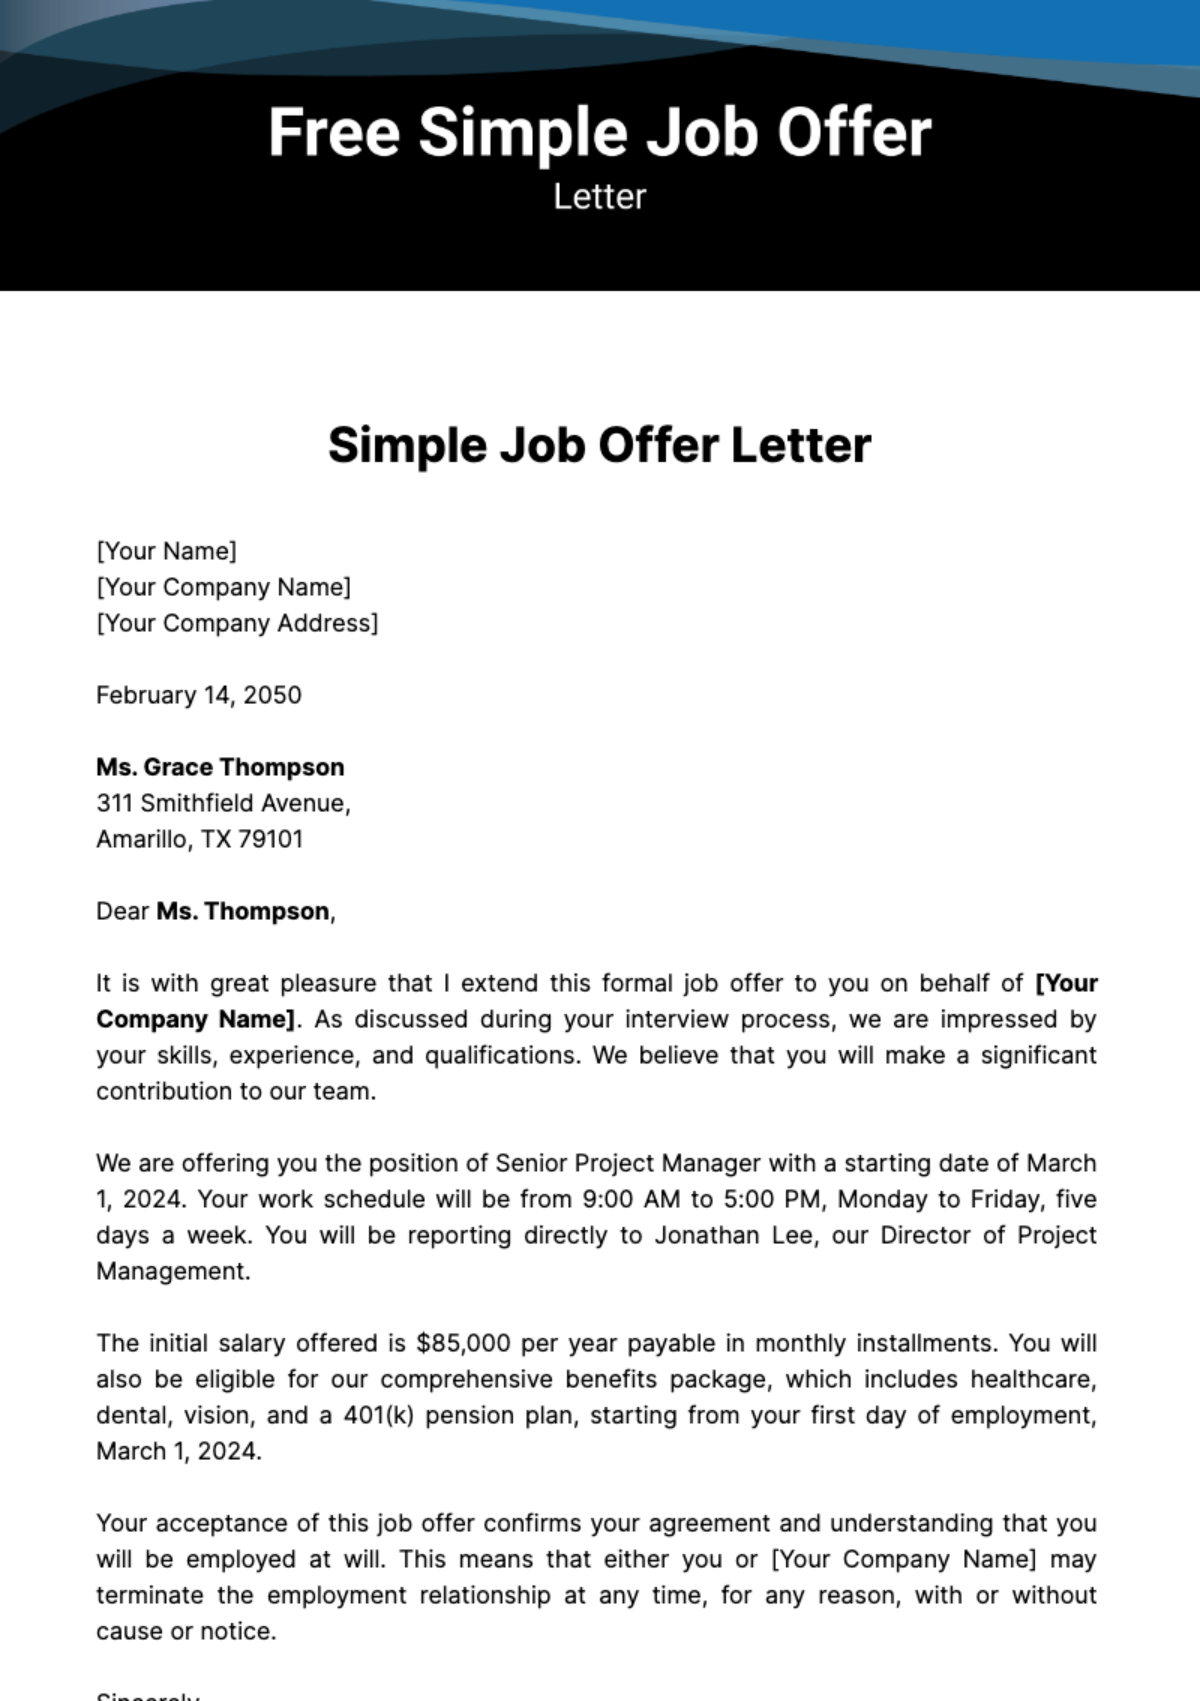 Free Simple Job Offer Letter Template